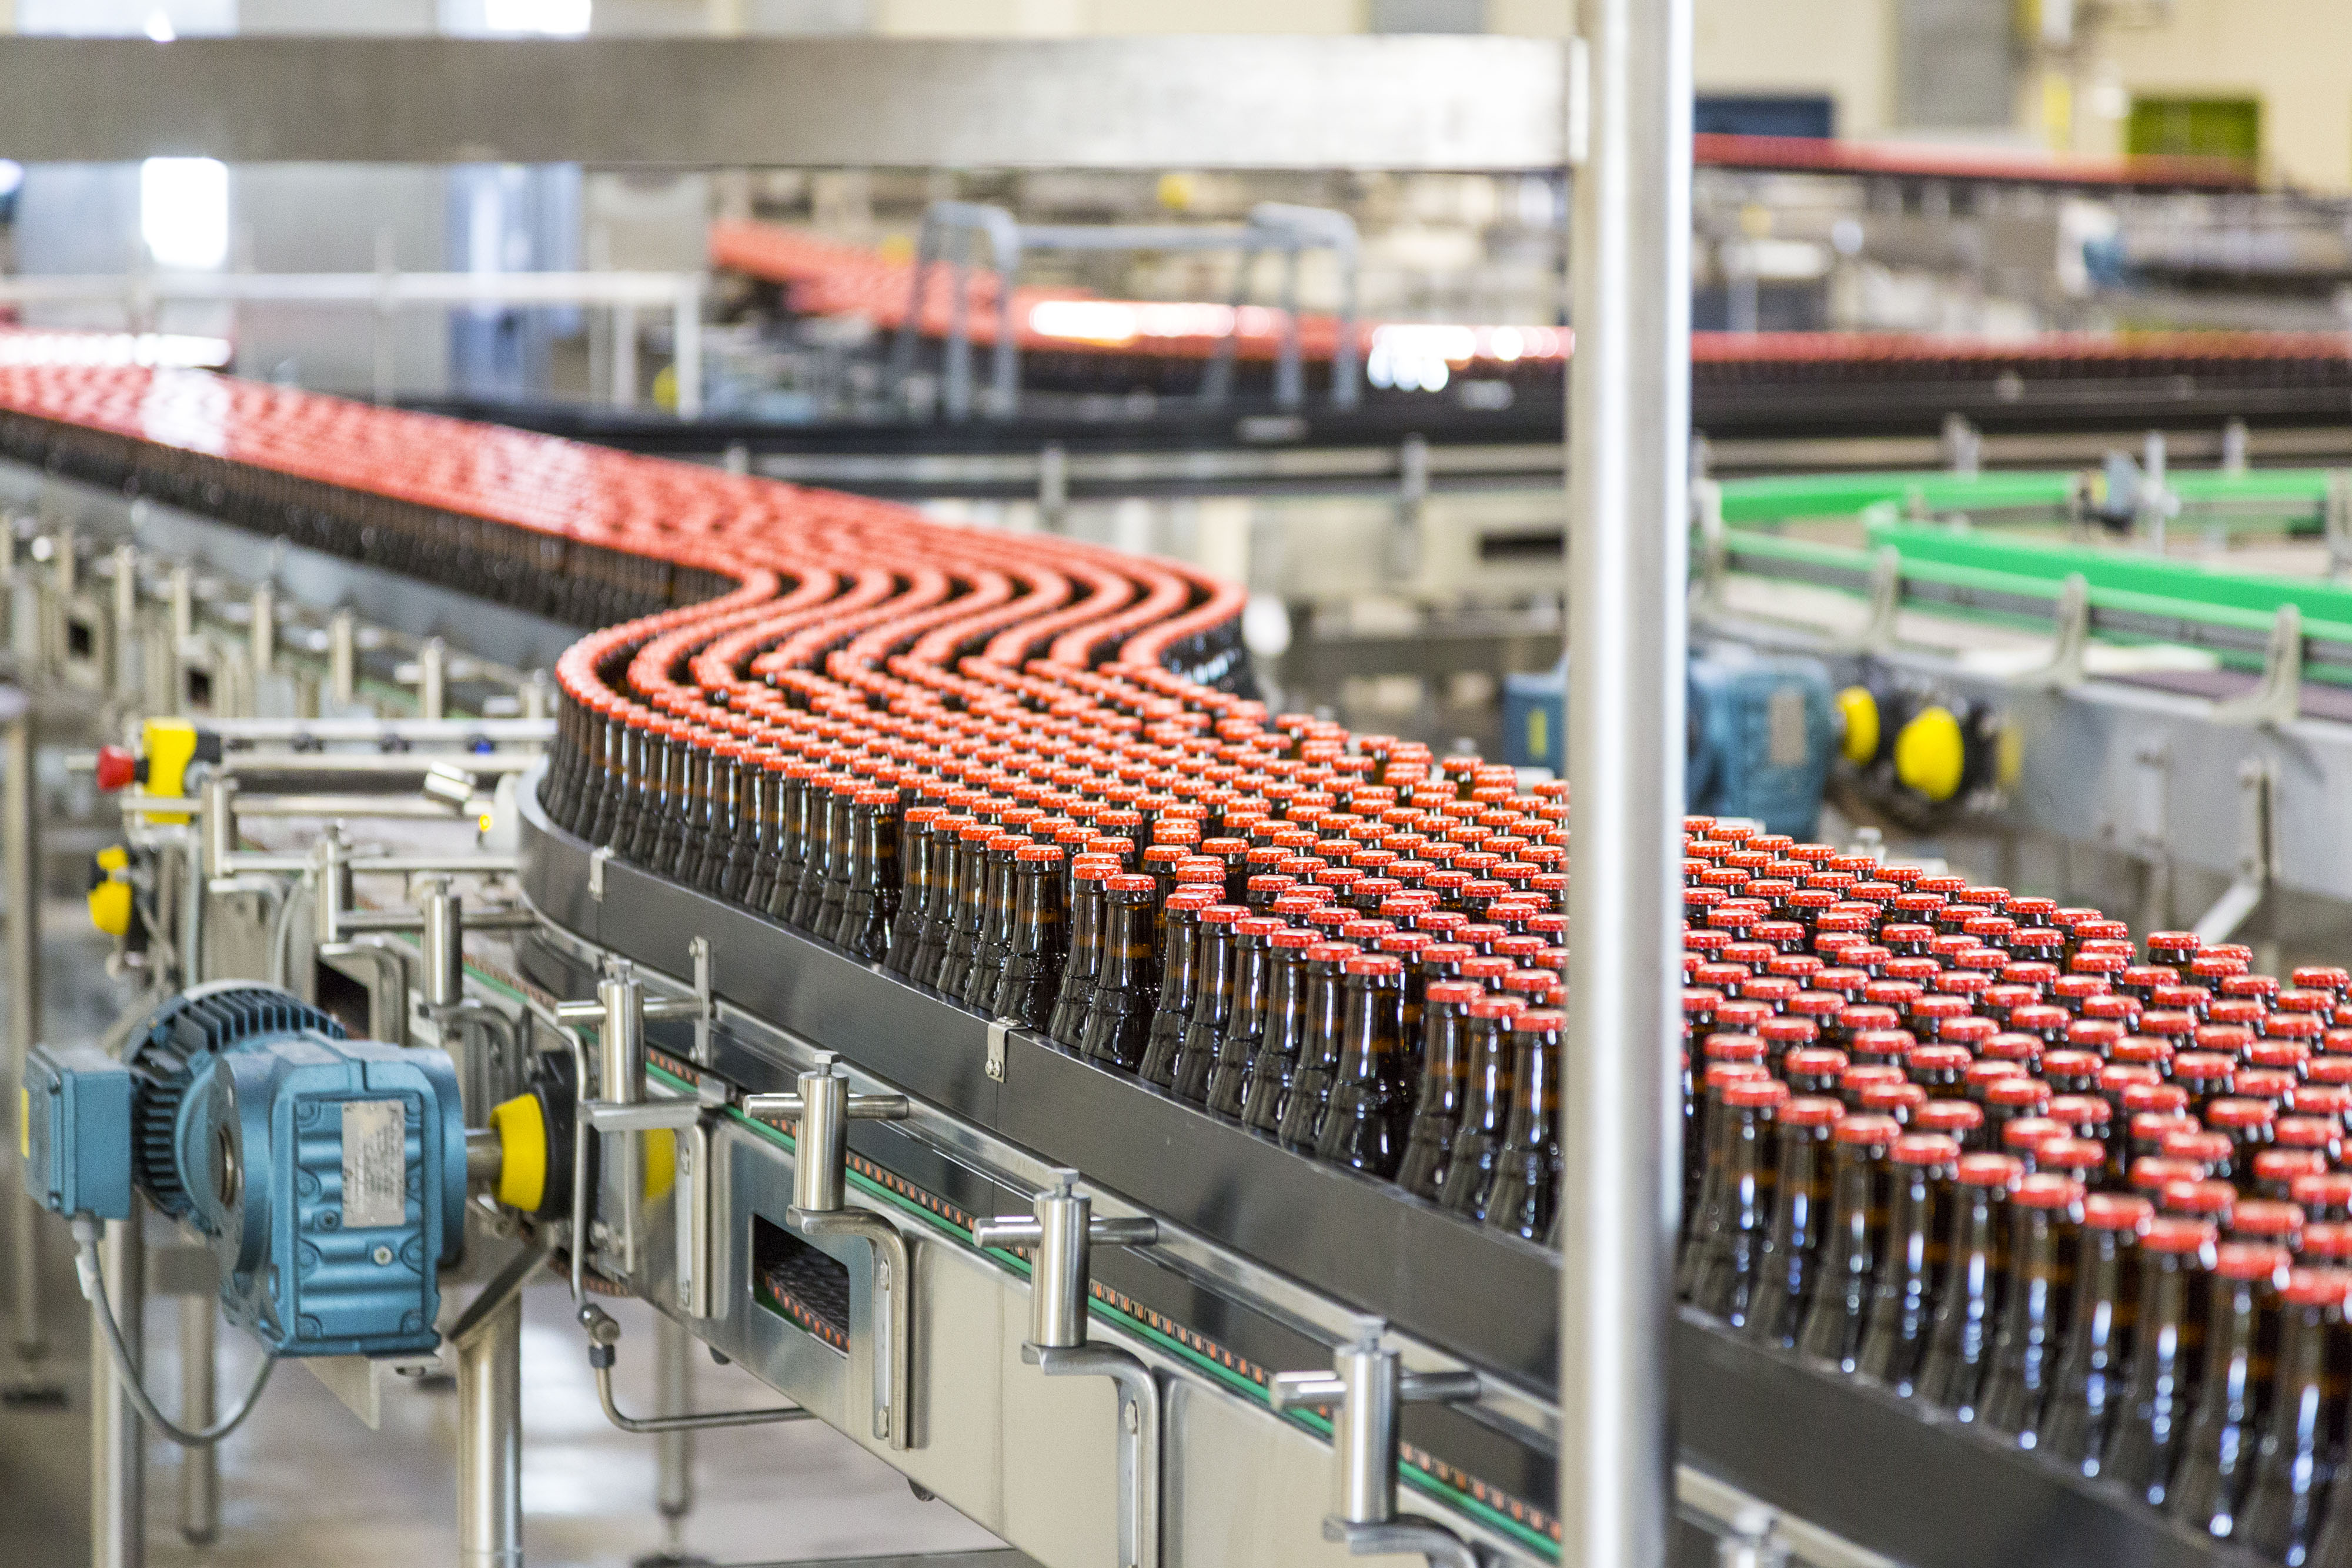 New Belgium’s production increased 18 percent from 2013 to 2014.